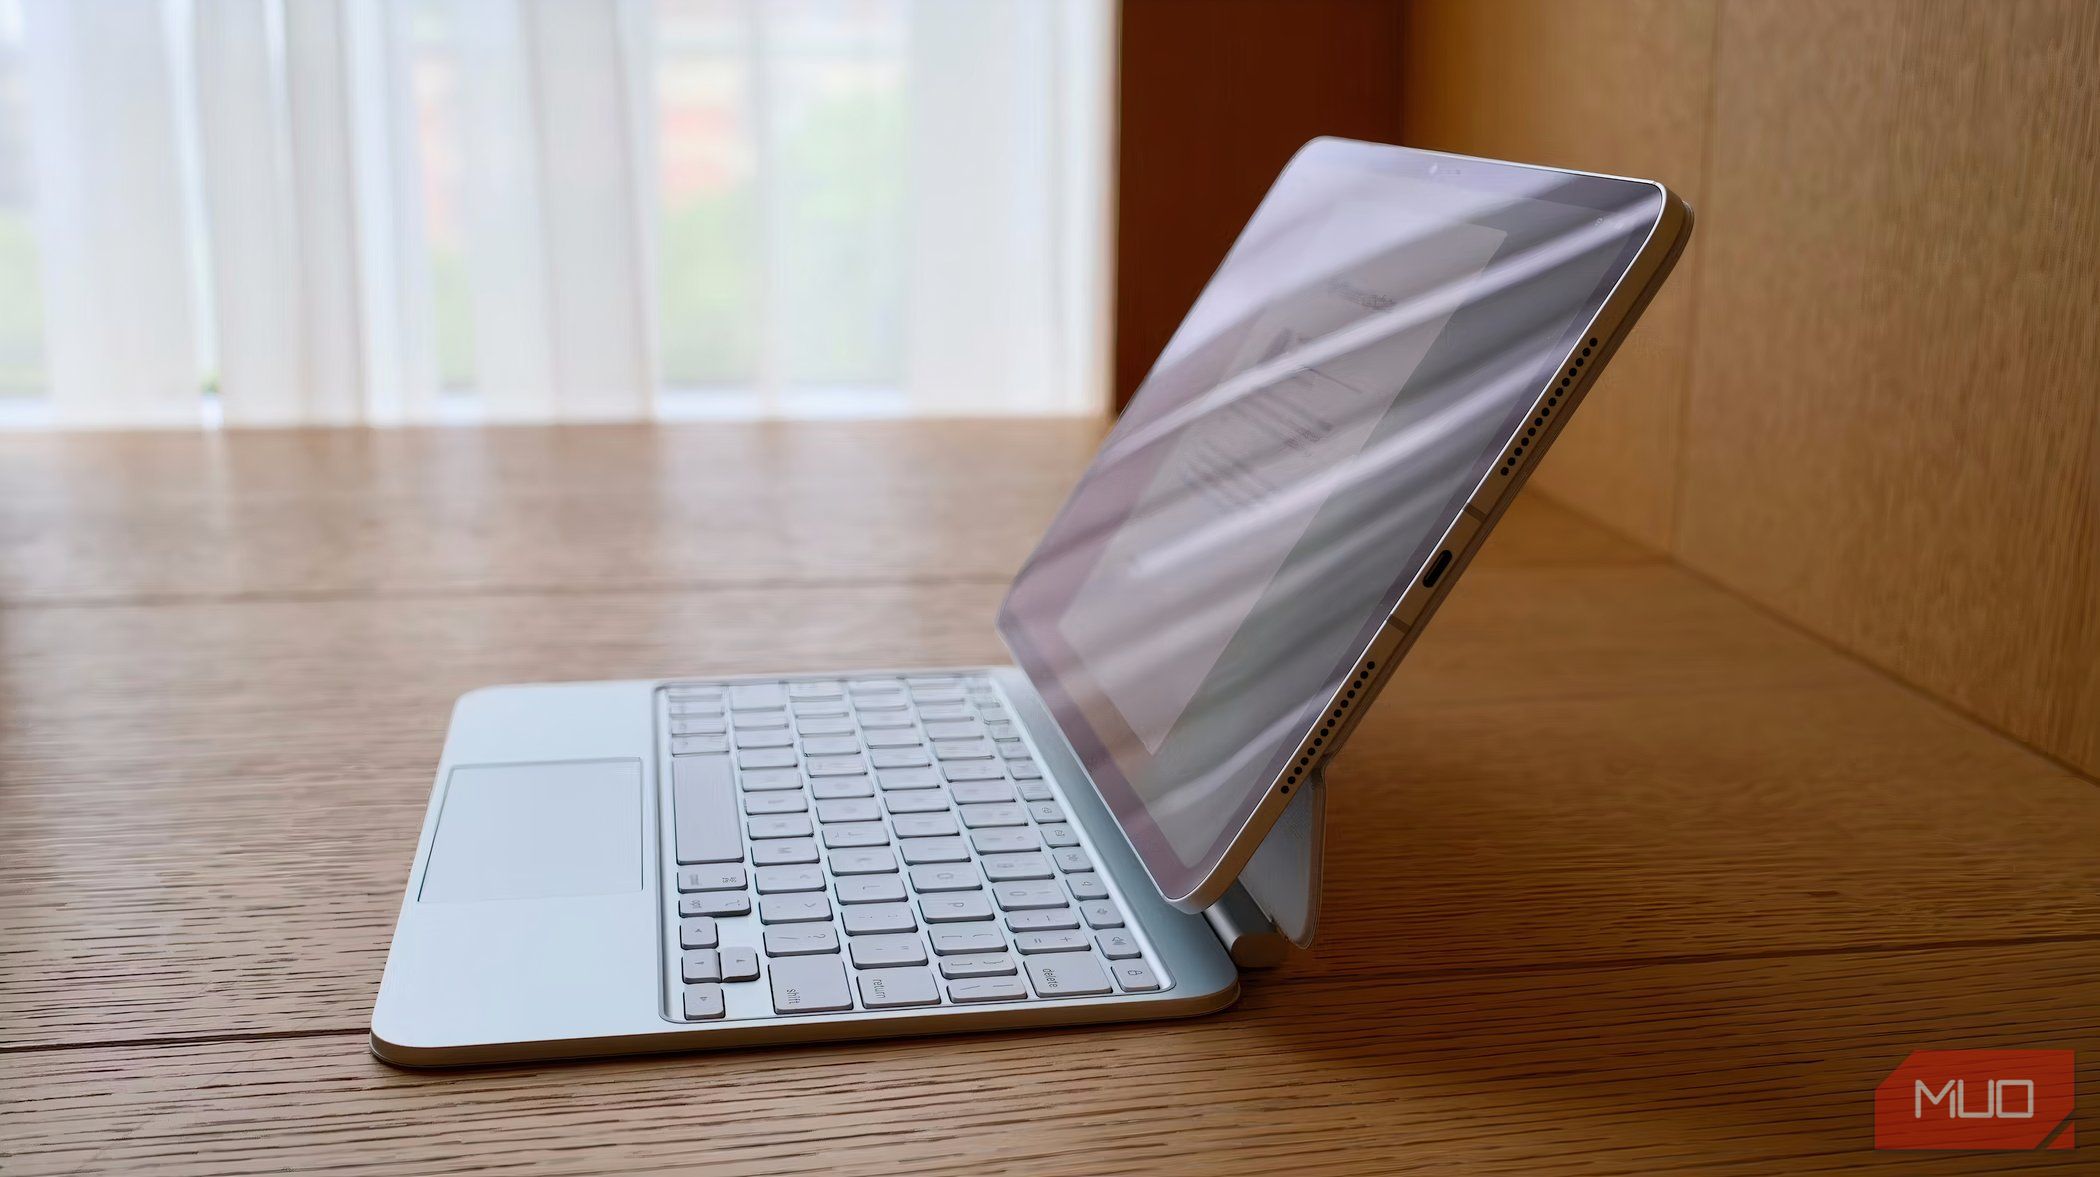 13-inch iPad Pro attached to a white Magic Keyboard on a desk